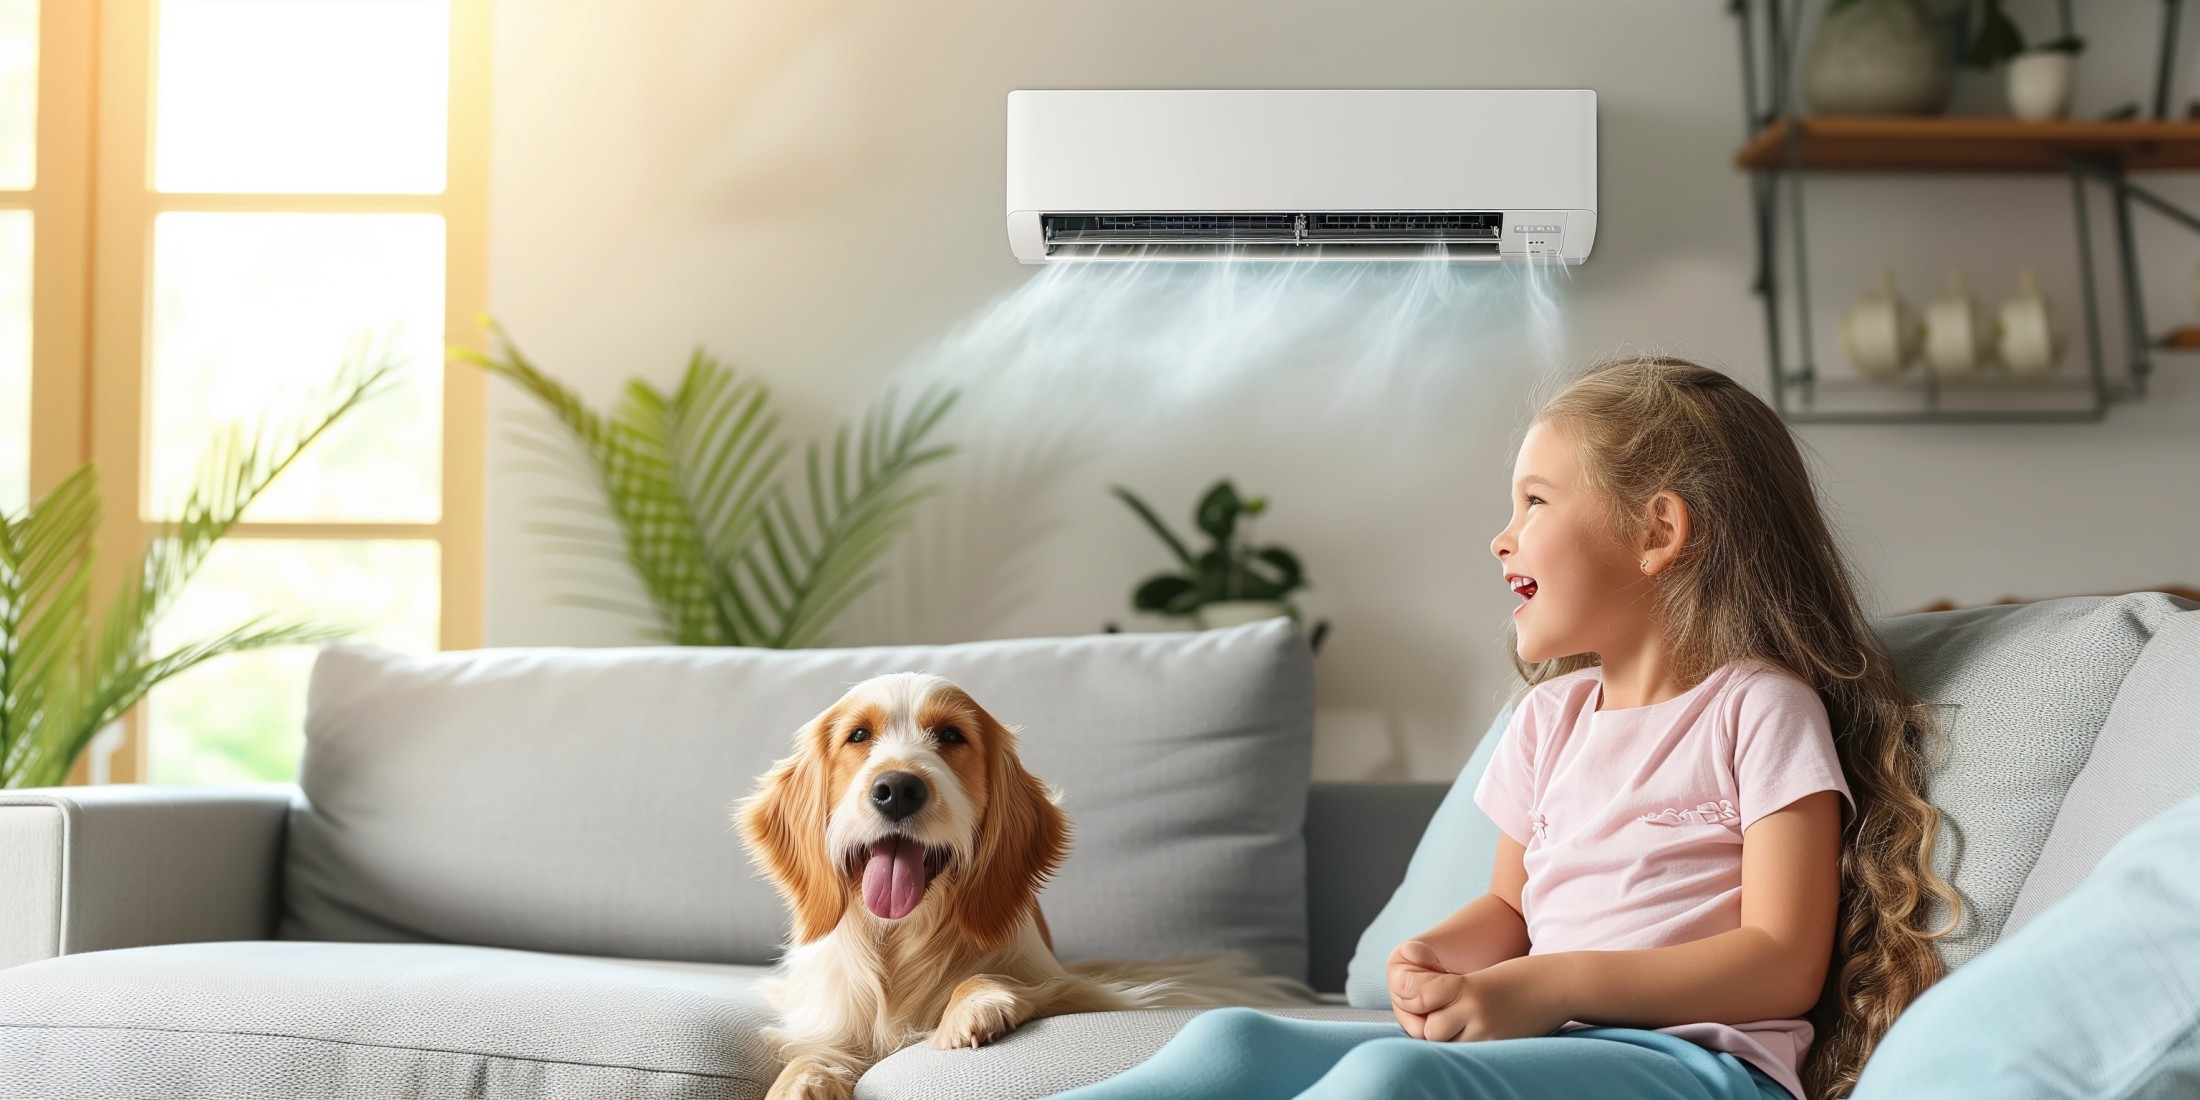 Innovative Air Conditioning Solutions for Toronto Homes